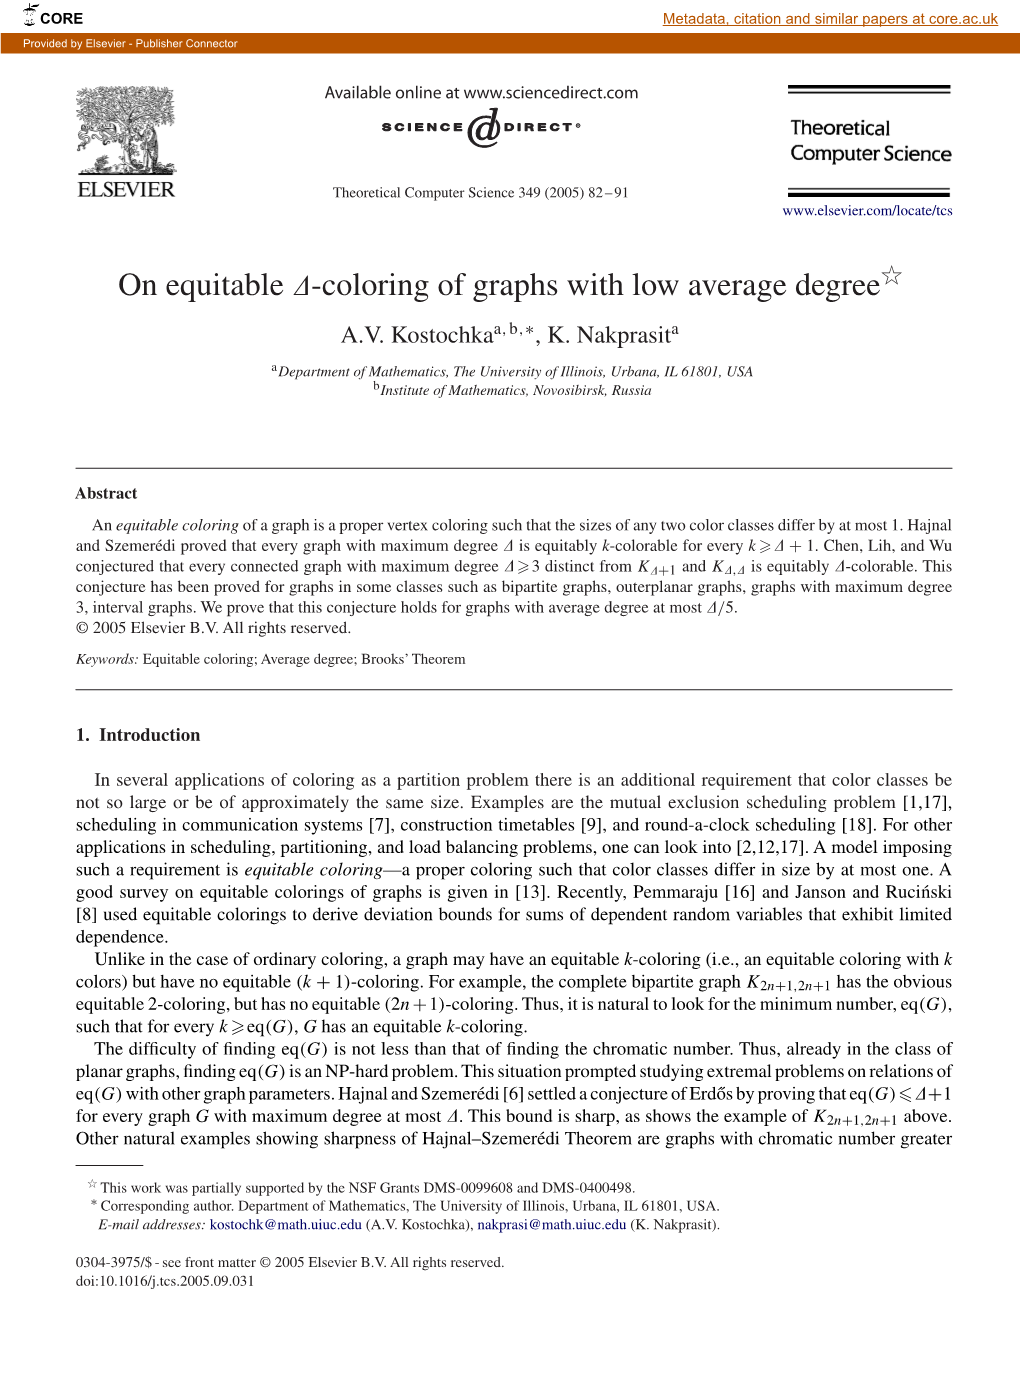 On Equitable -Coloring of Graphs with Low Average Degree